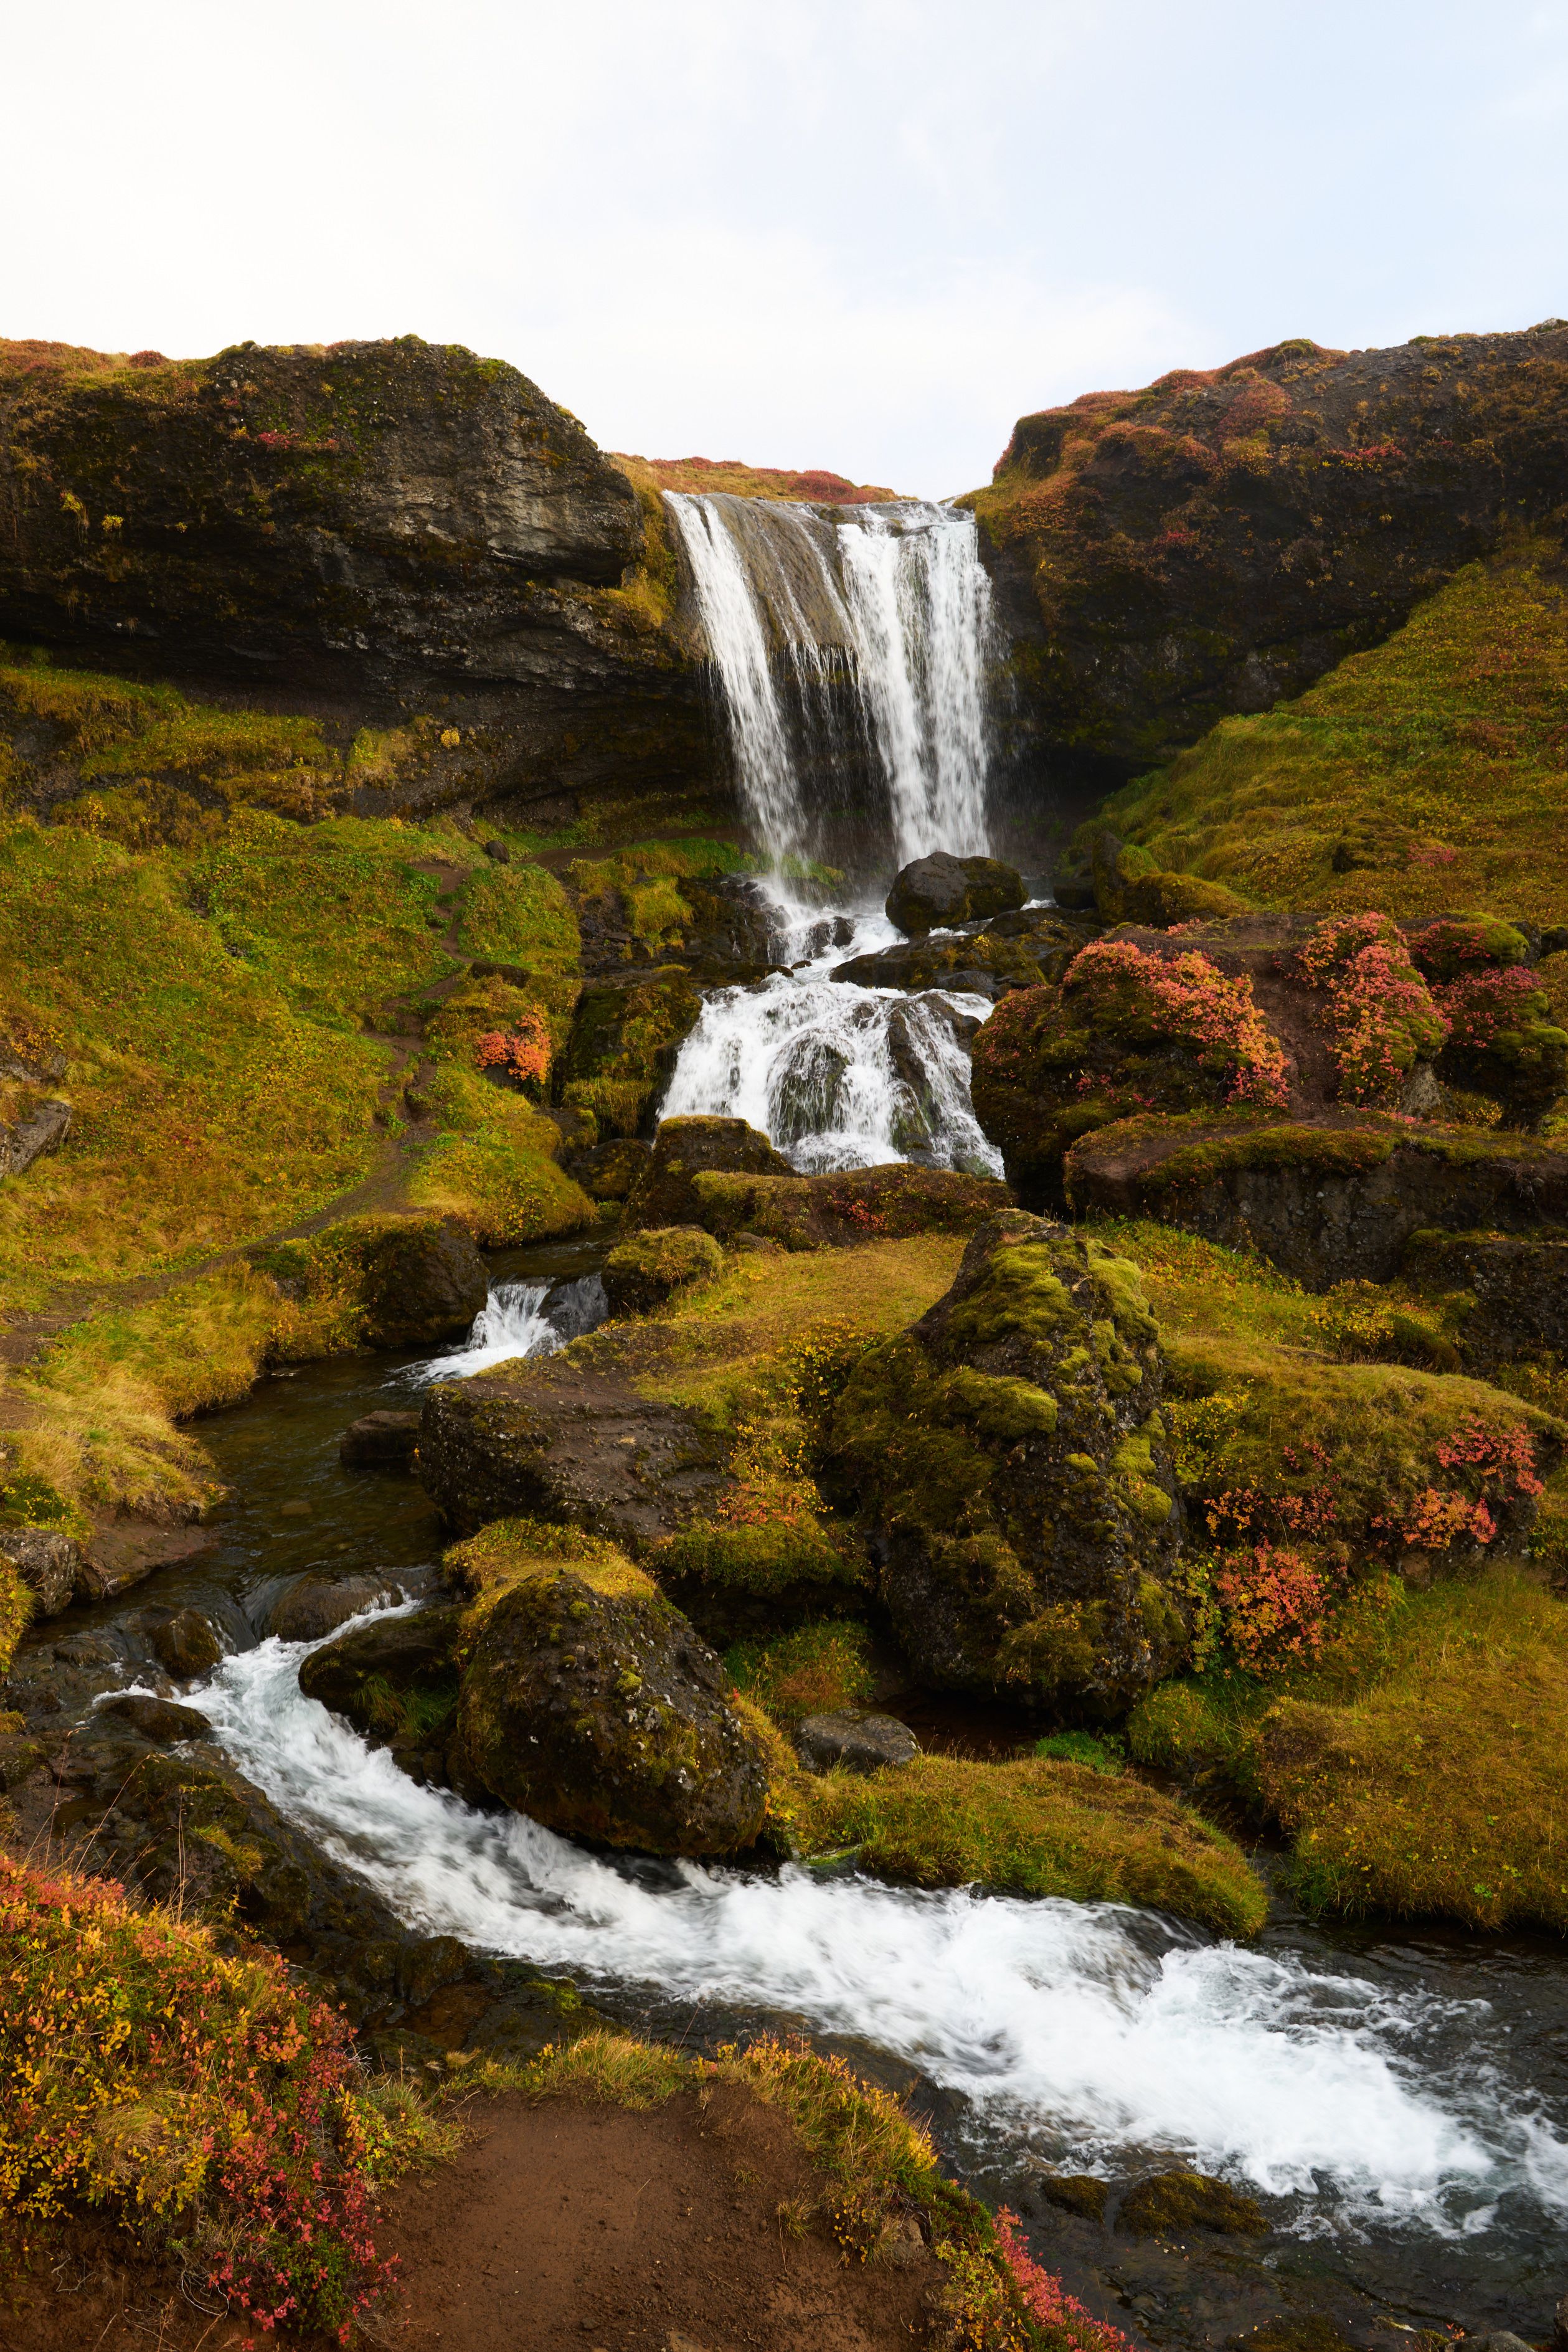 A waterfall on the Vatnaleidh pass surrounded by lush green